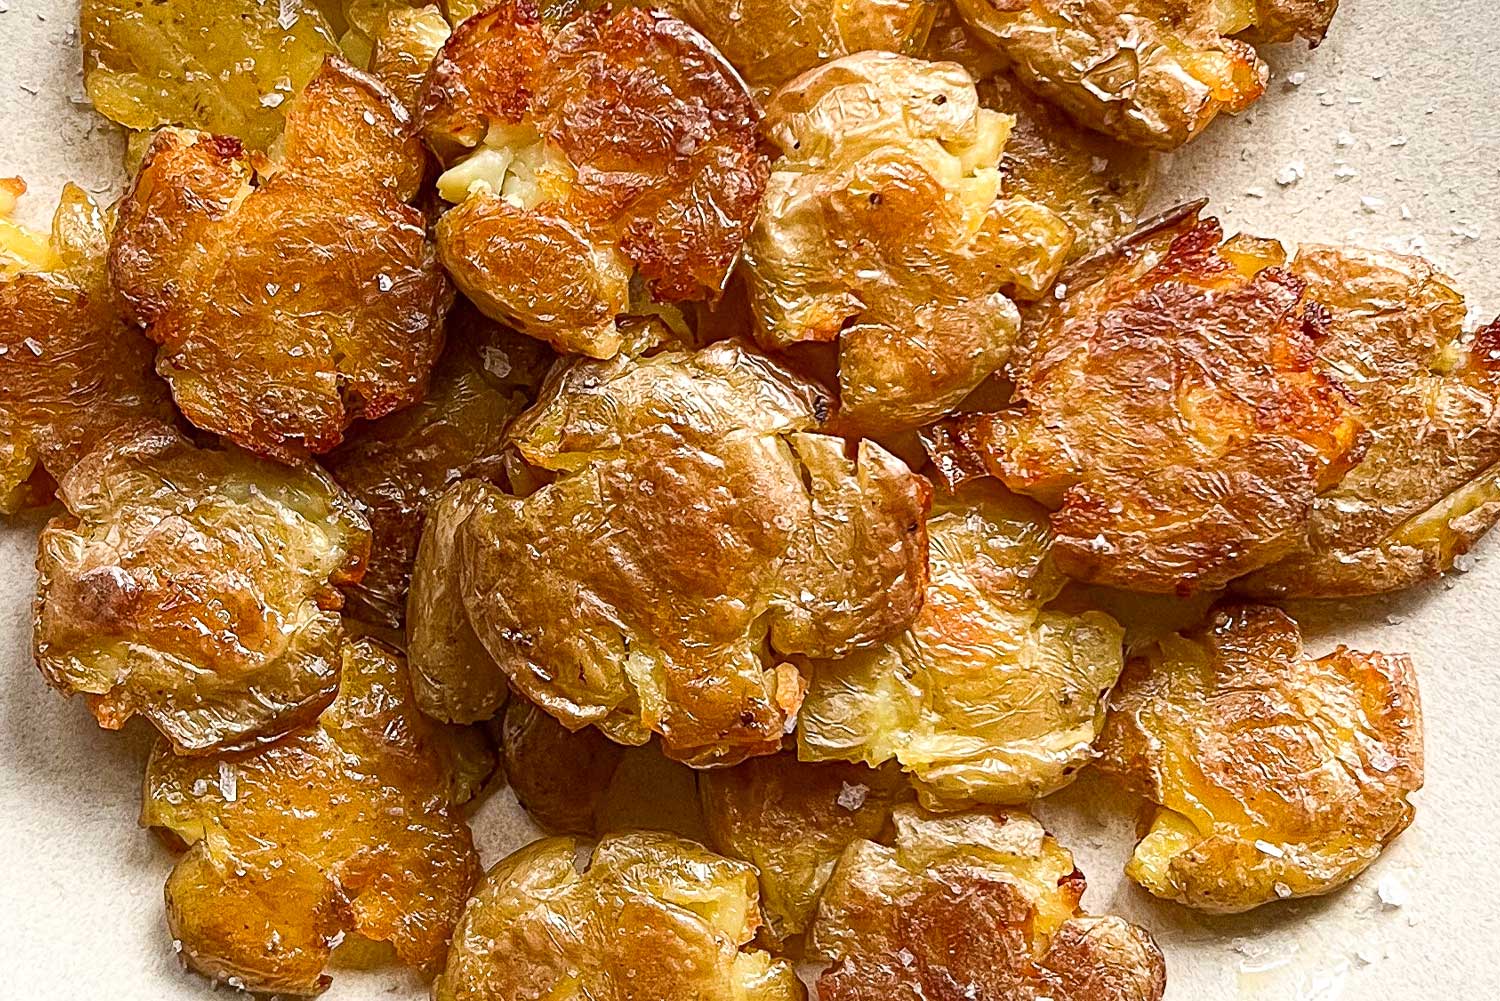 A close up of a pile of roasted crispy smashed potatoes, brown and glistening with olive oil and sprinkled with flakey sea salt.